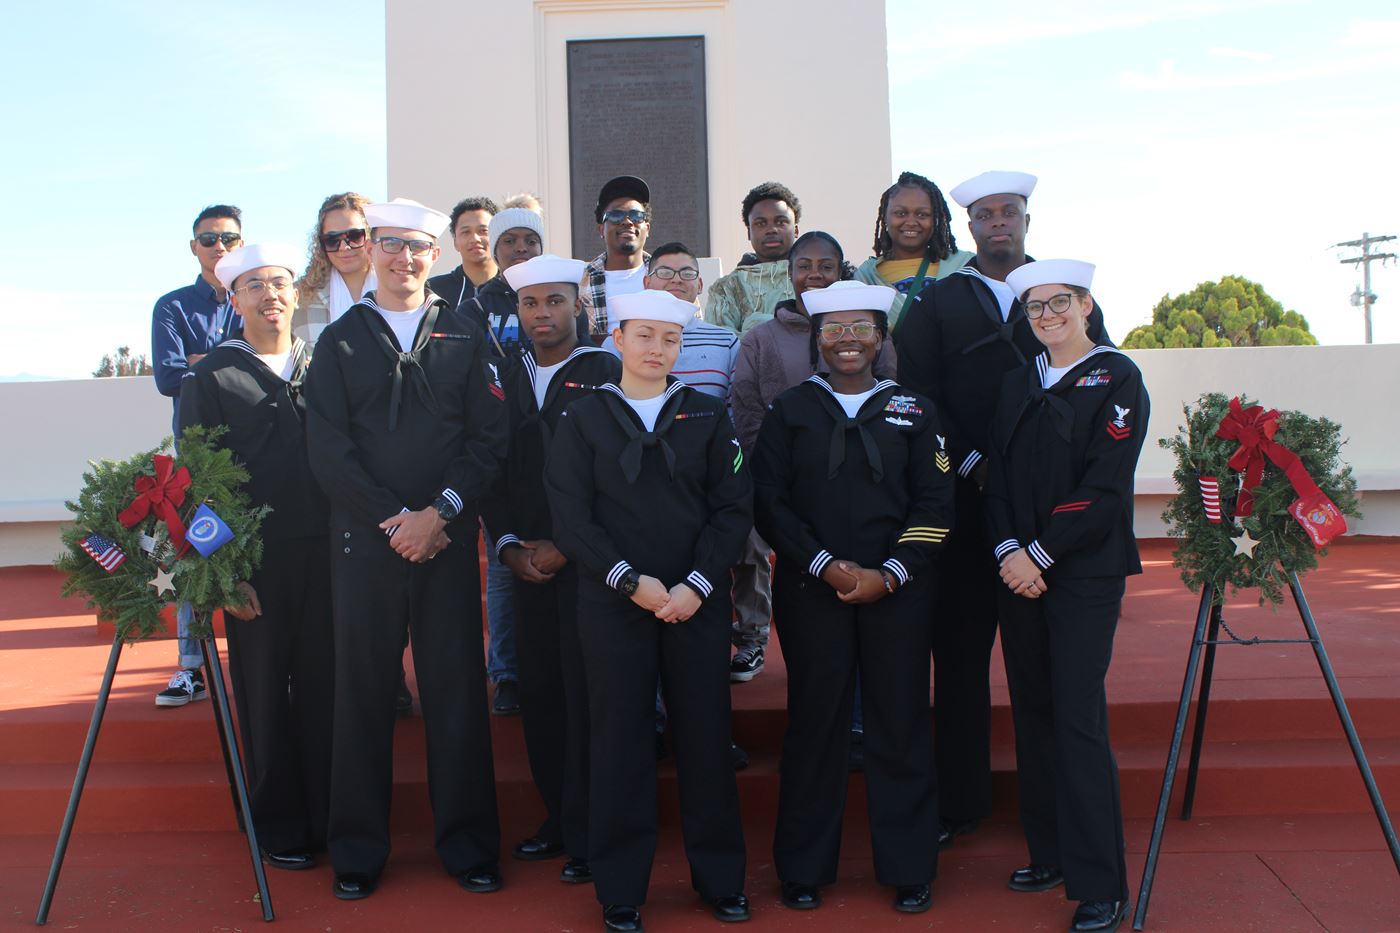 NAVY TEAM IN CHARGE OF GREETING GUEST AND PHOTOGRAPHY